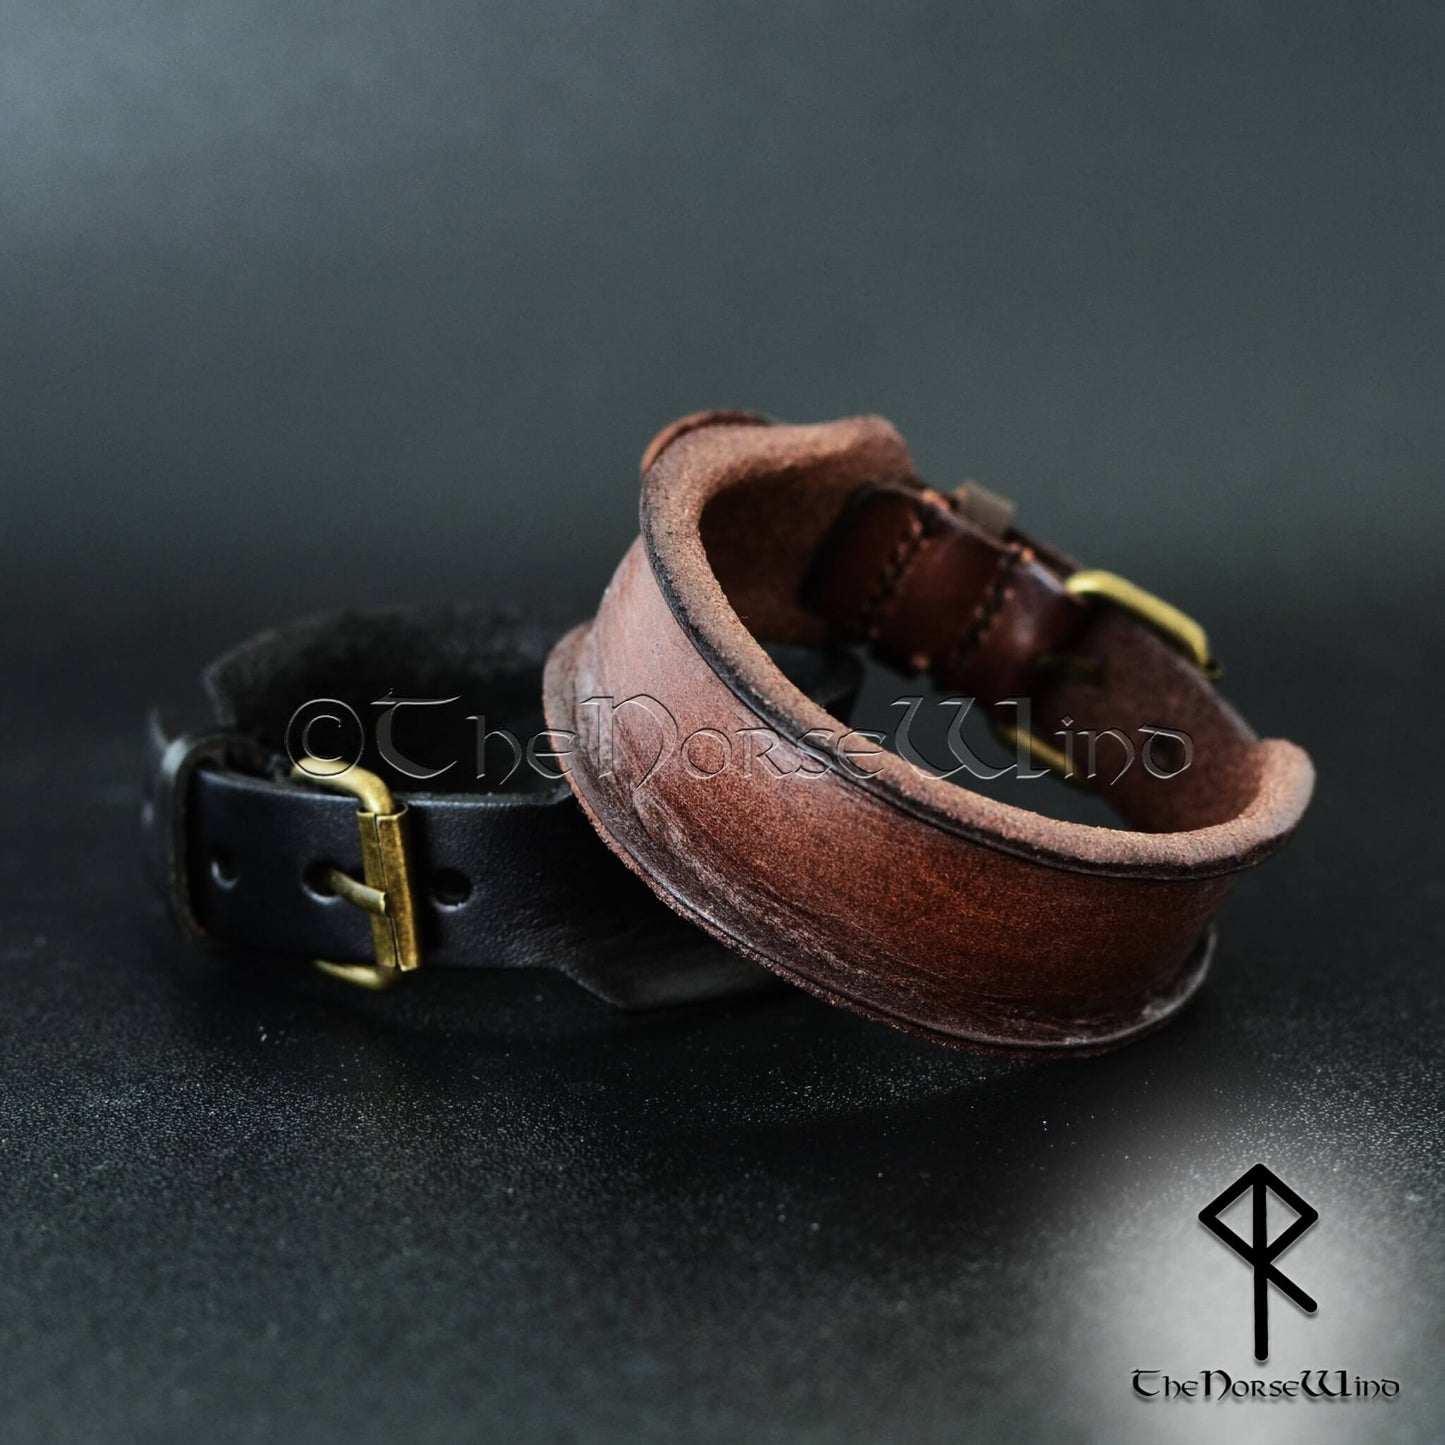 Authentic Viking Leather Cuff Bracelet Norse Wristband - The Norse Wind